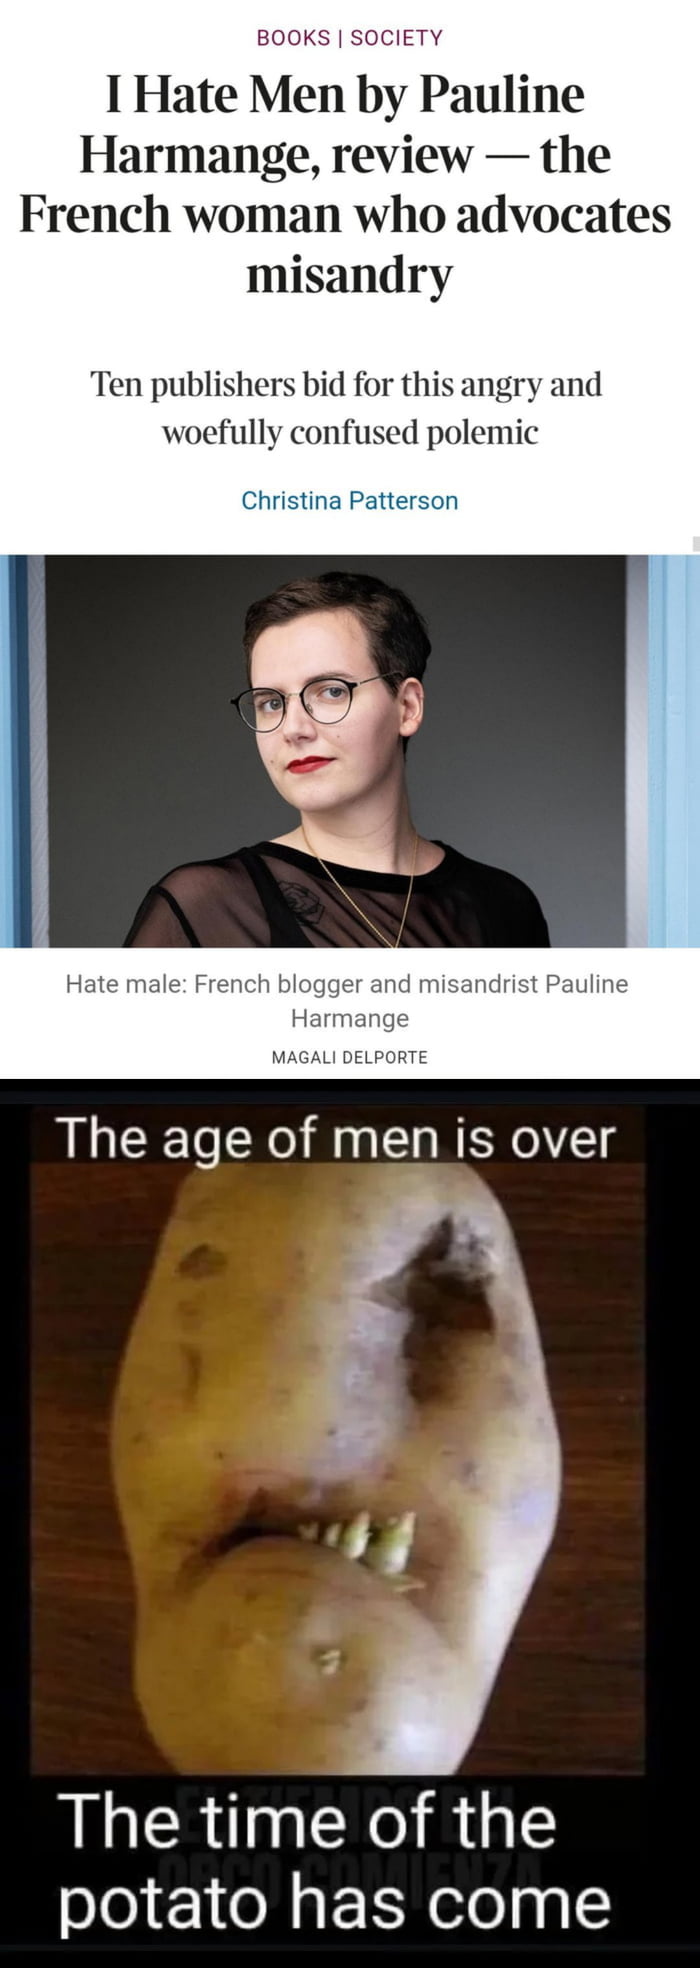 Hates men - tries to look like one. Amazing how ten publishe